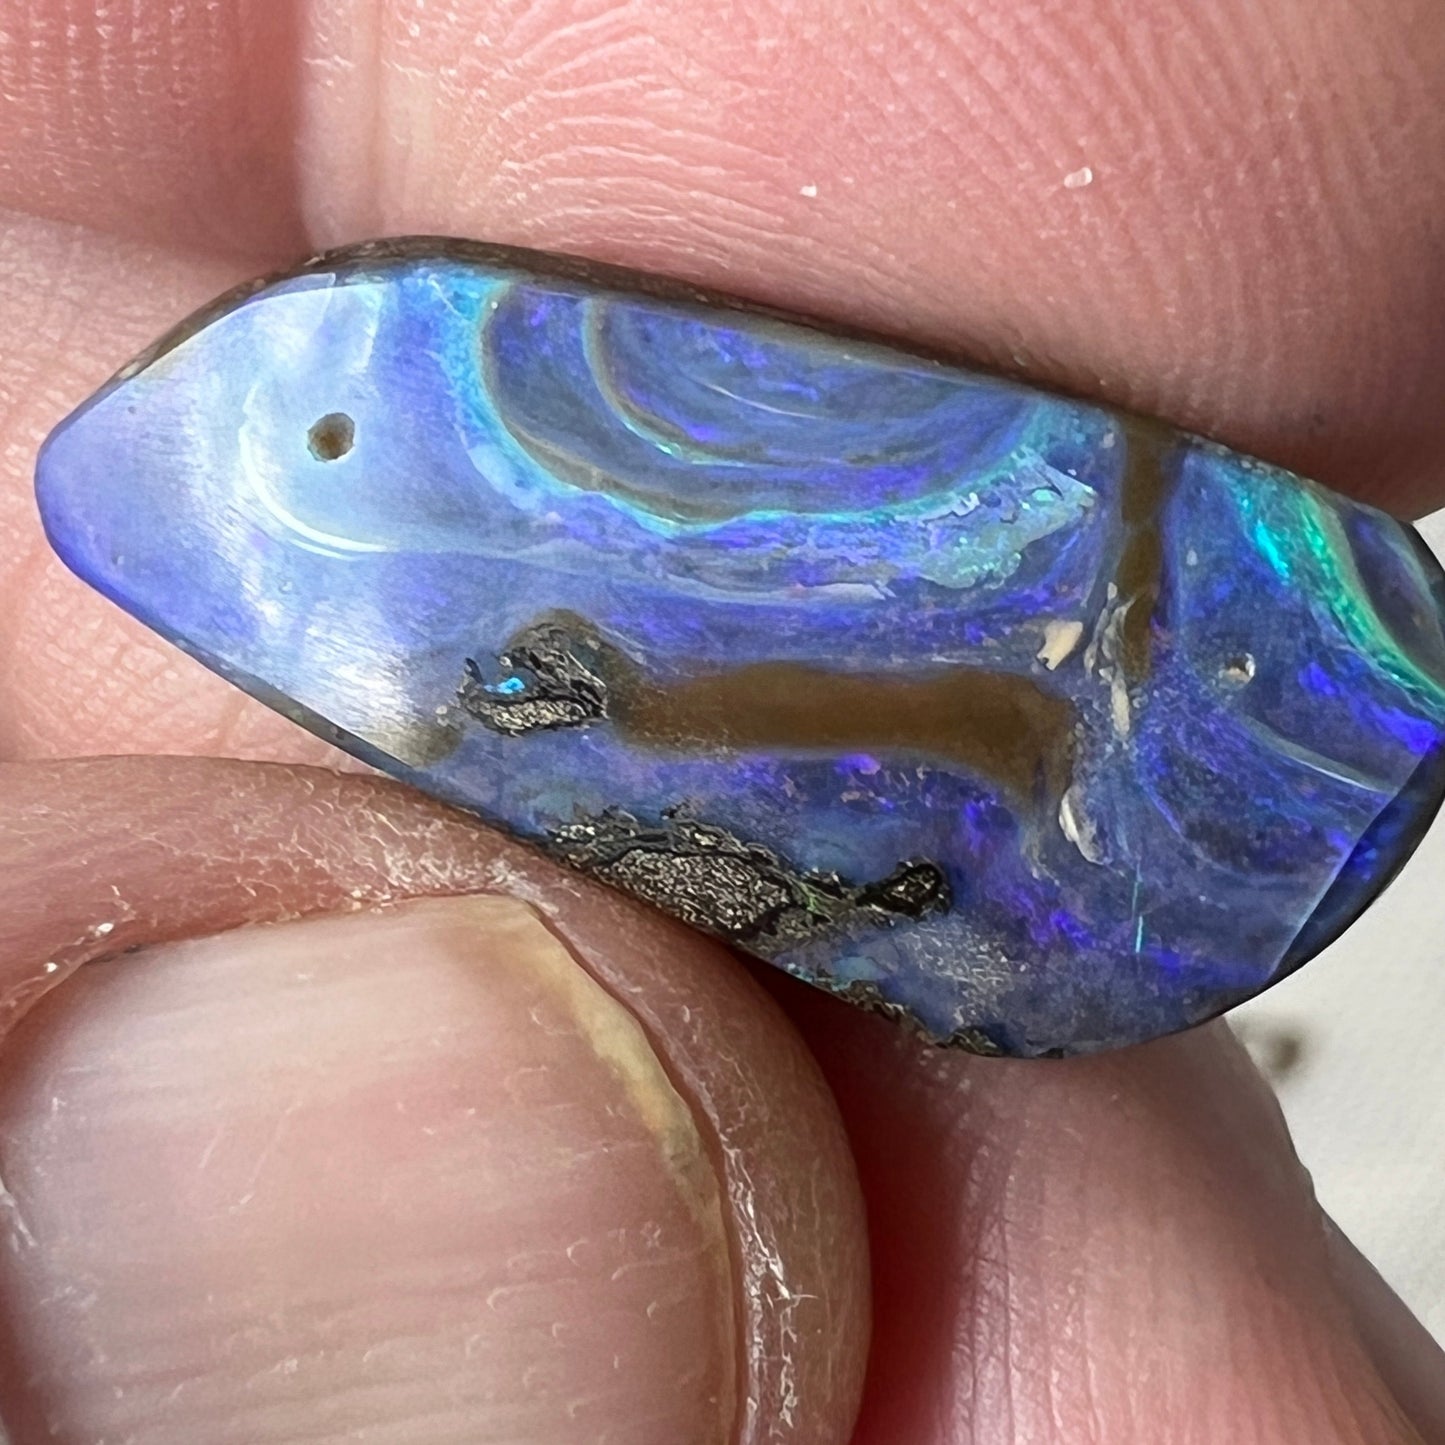 Bright and bold colours and awesome patterns in this beautiful piece of boulder opal from Winton. Nicely polished and a perfect pendant.